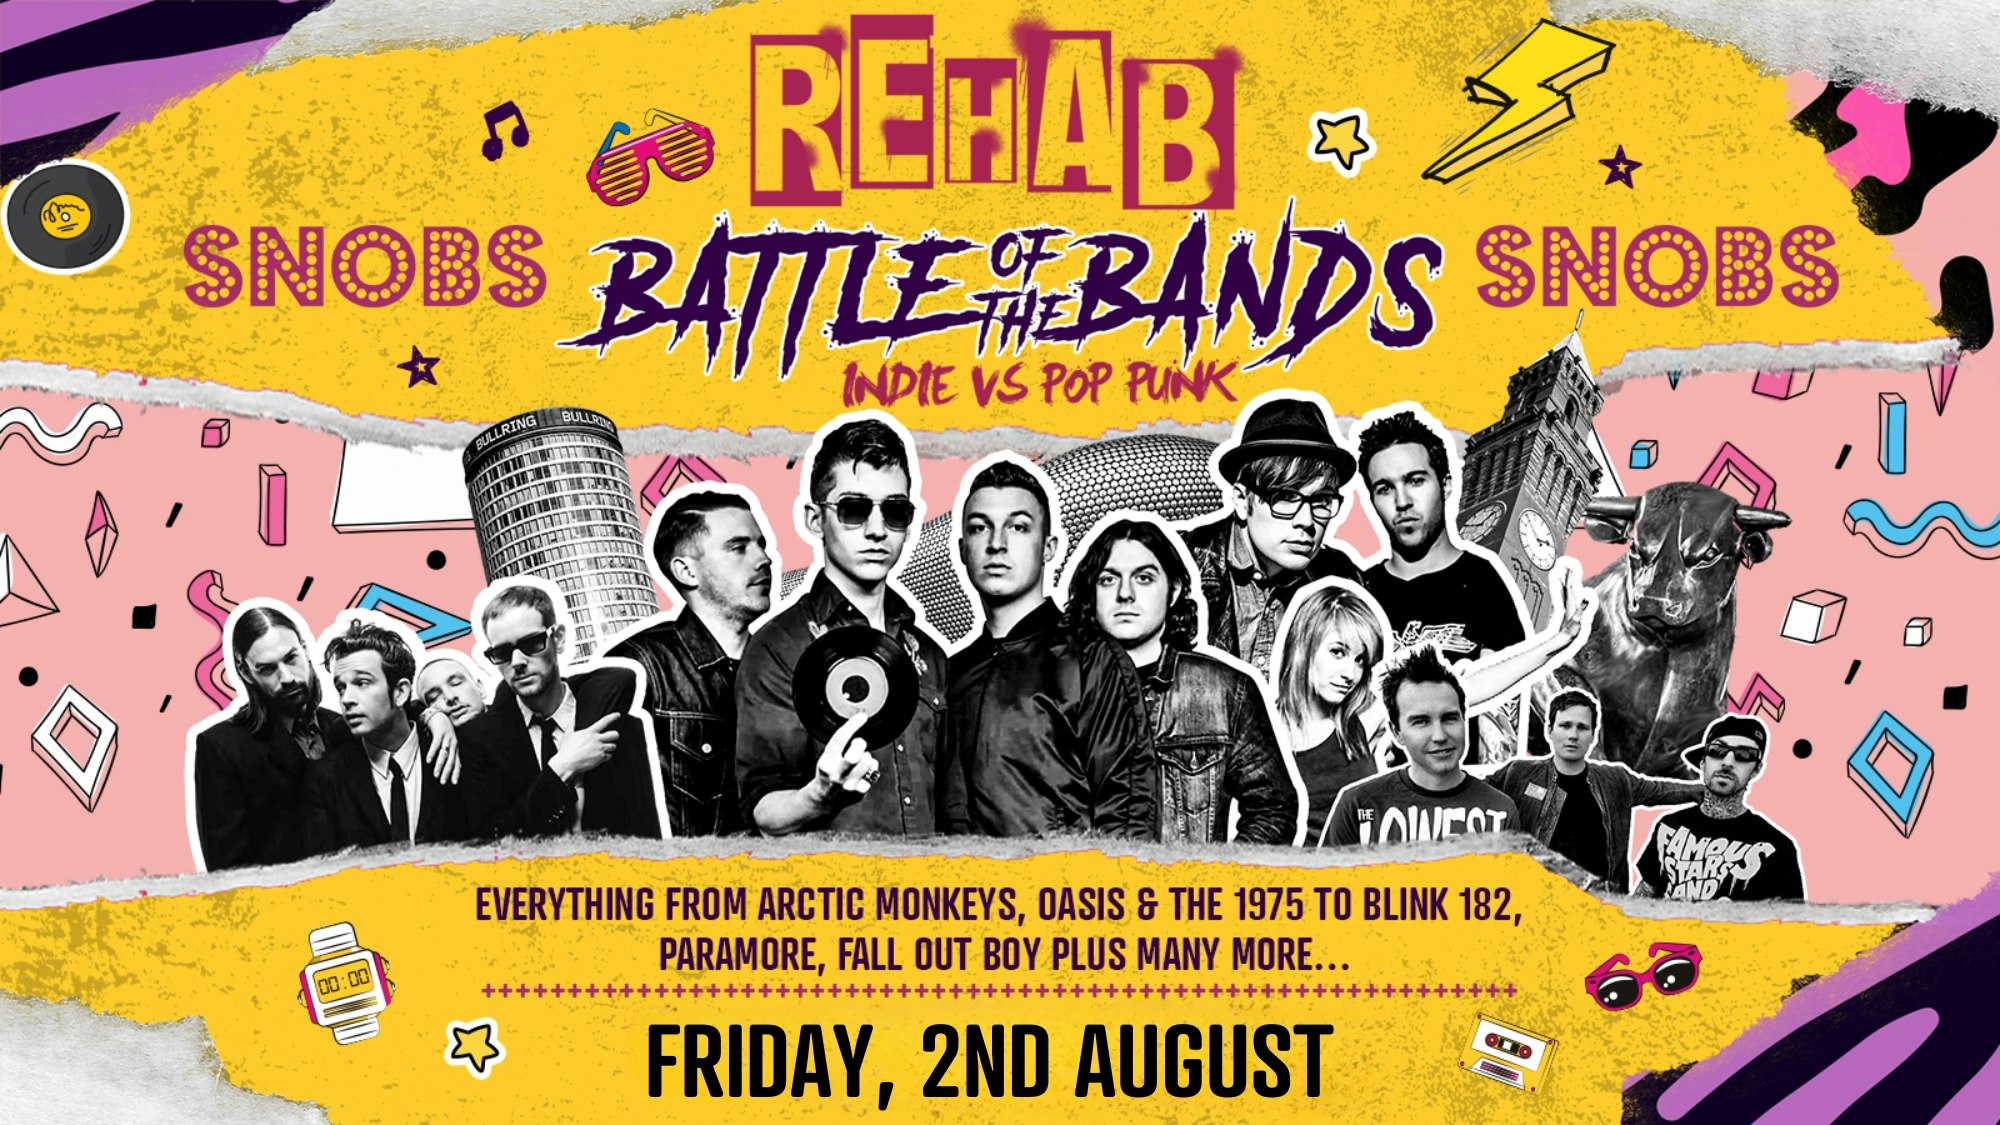 Rehab Fridays: Battle of the Bands⚡️INDIE VS POP PUNK⚡️ 2nd August